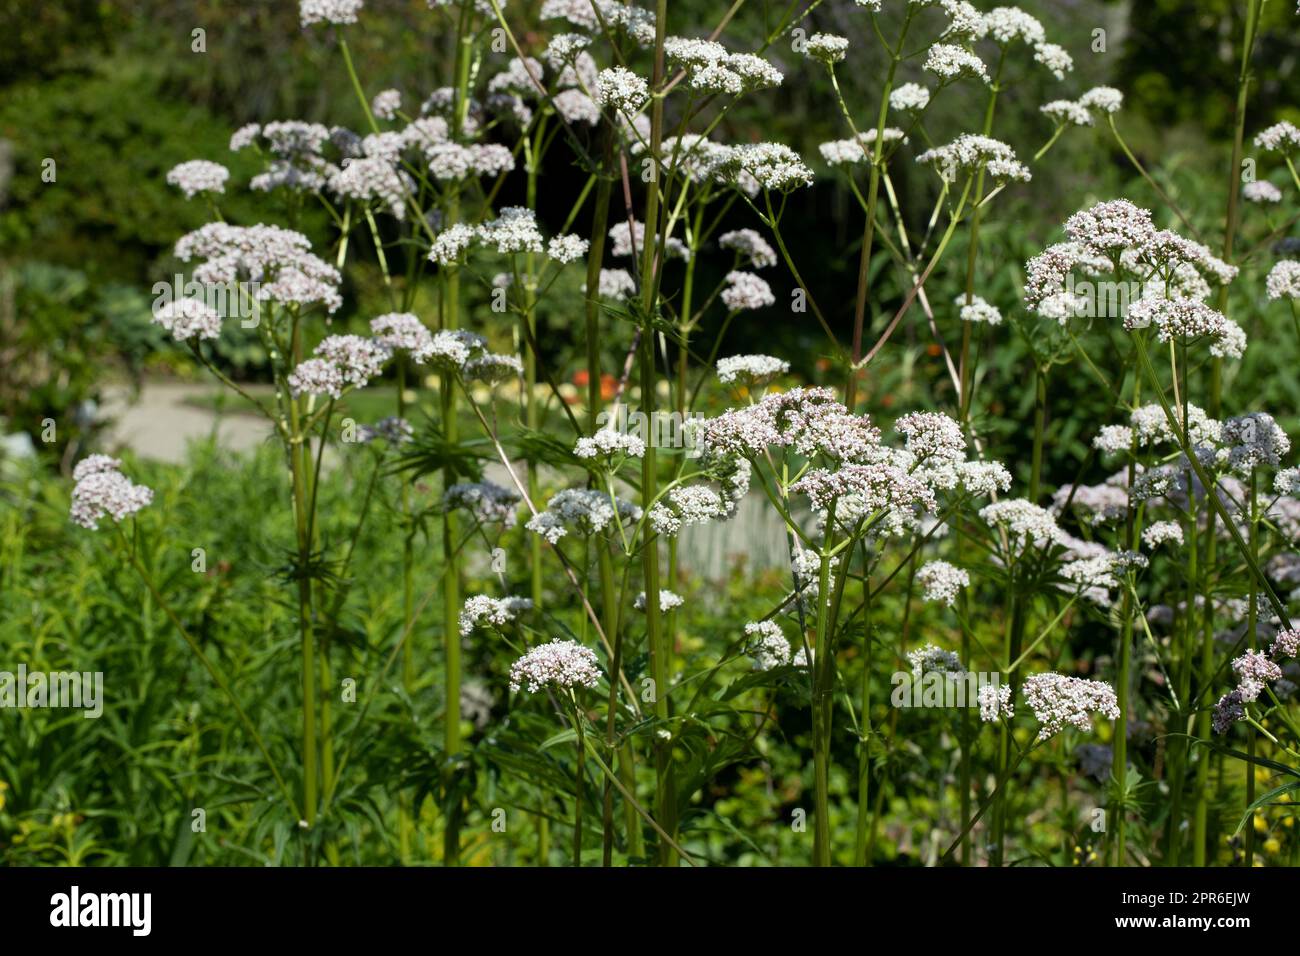 Blooming Valeriana officinalis in a garden Stock Photo